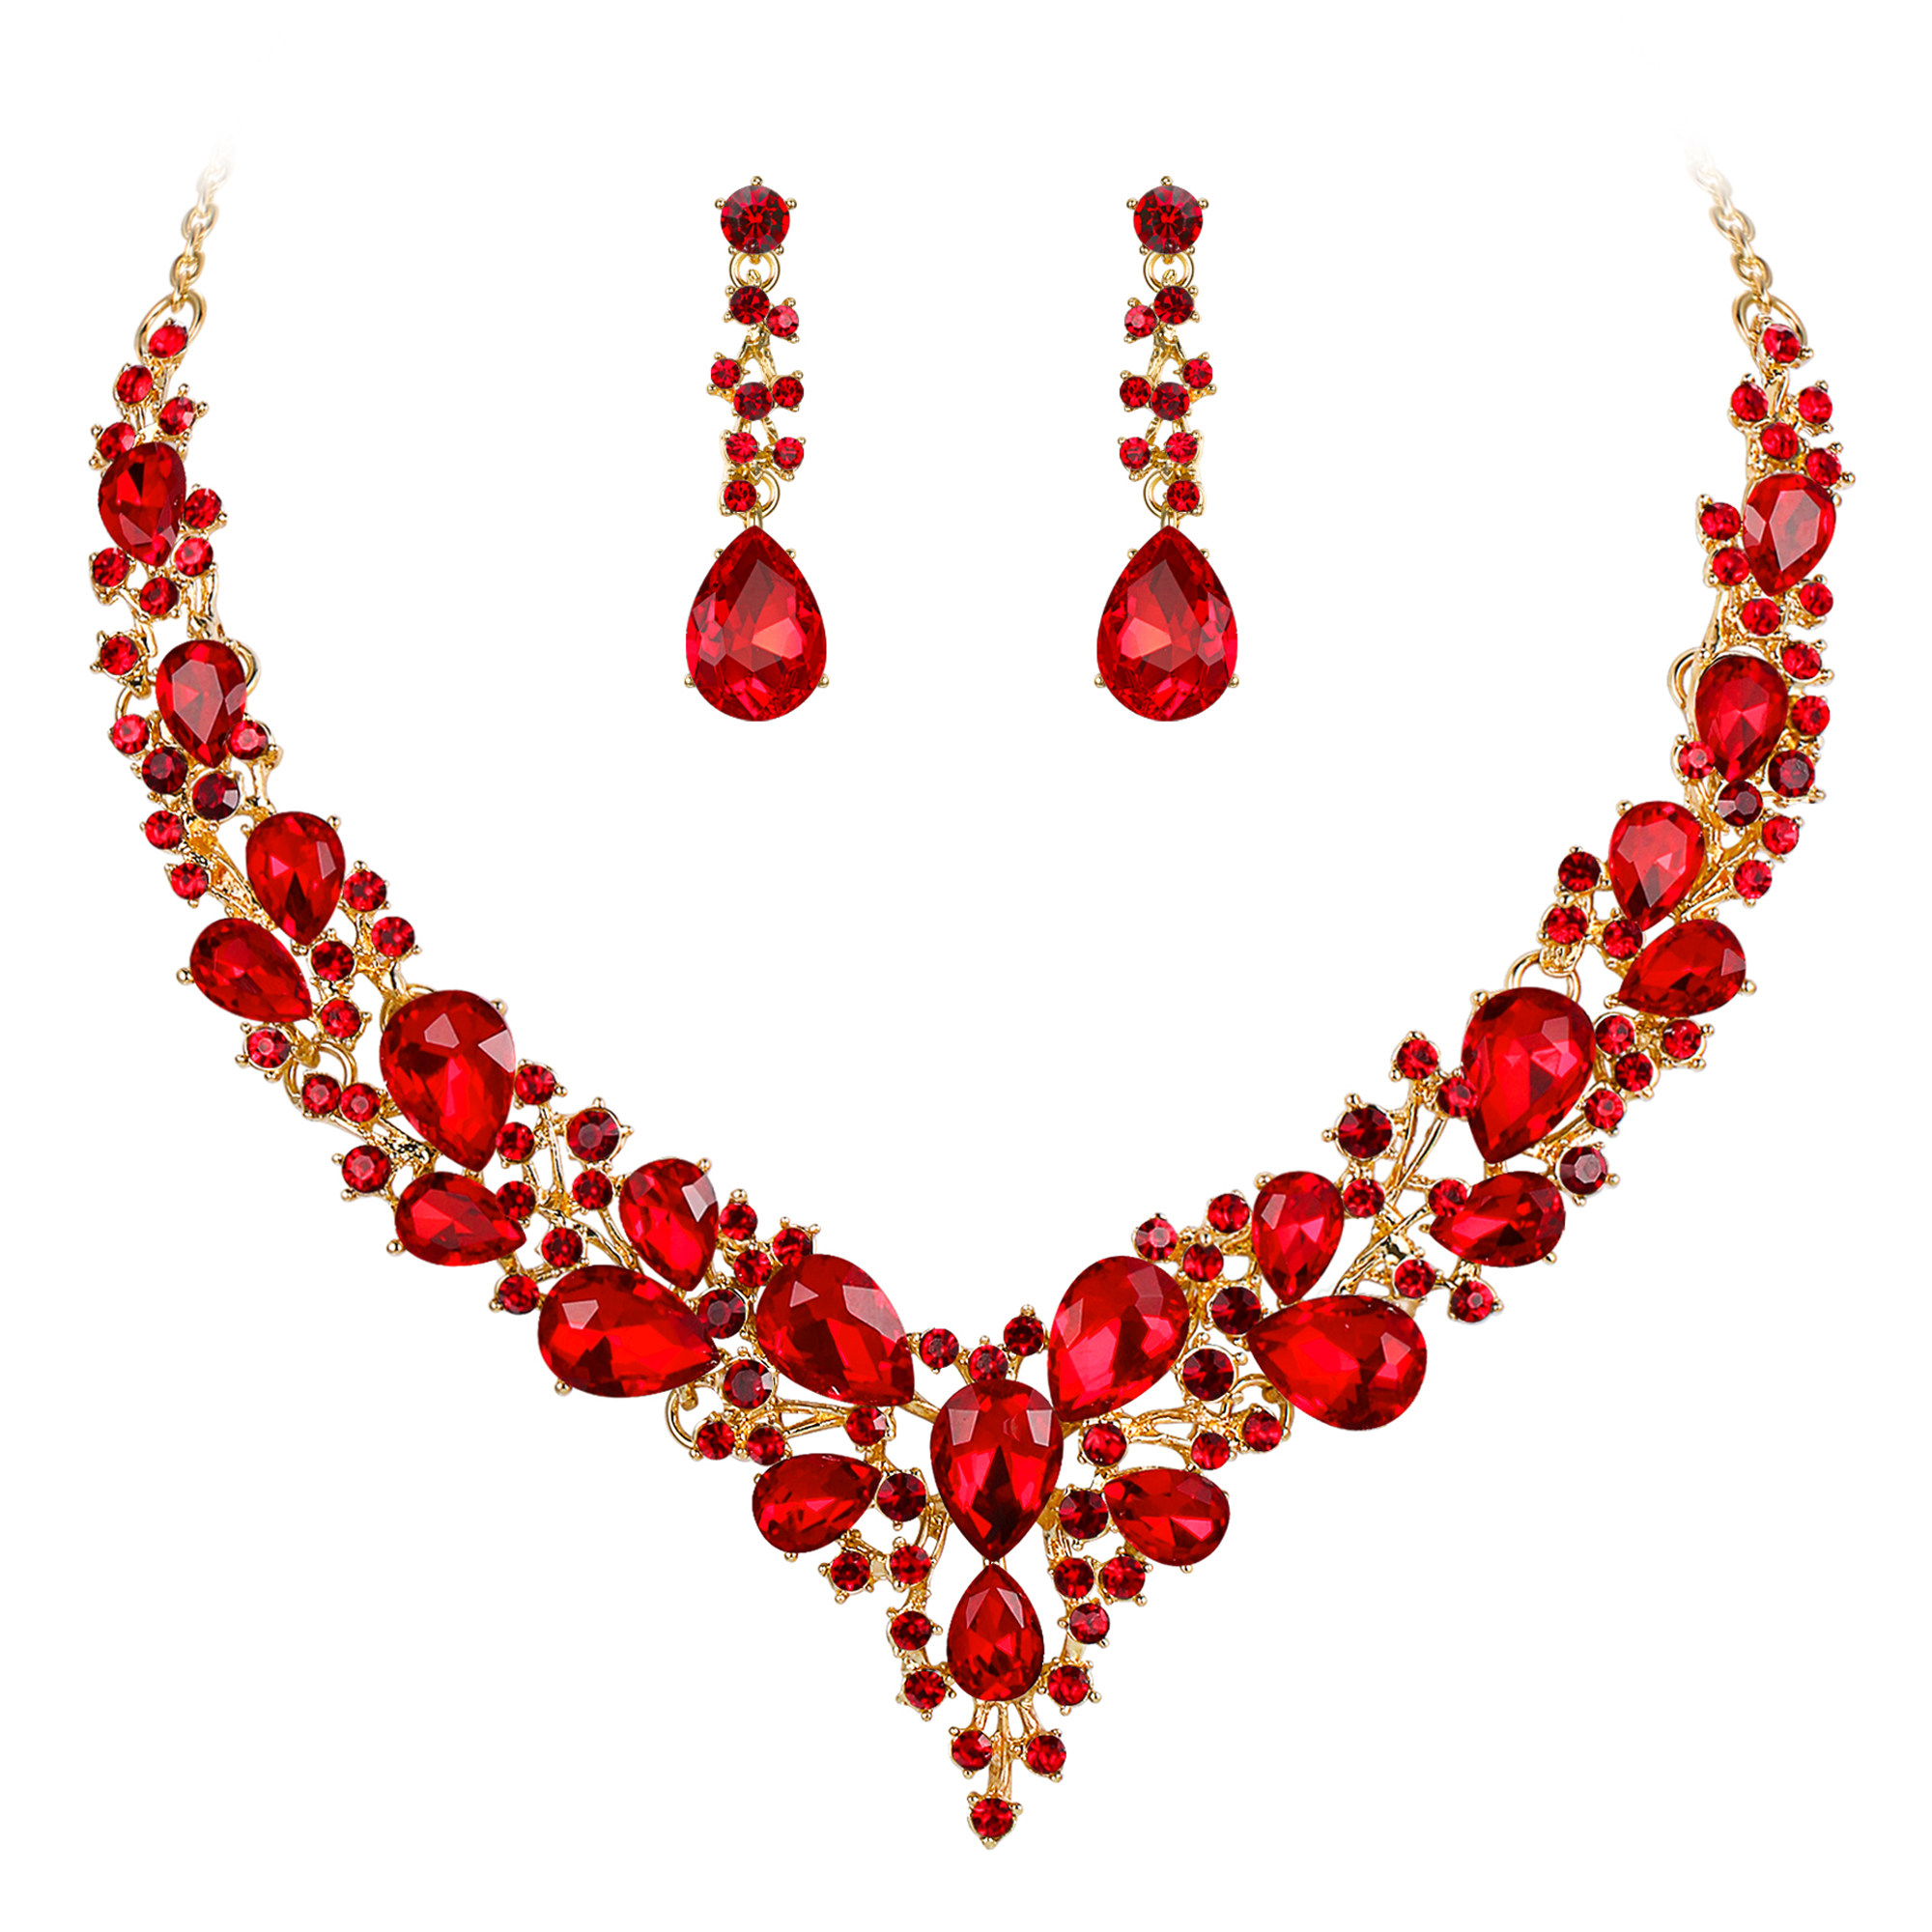 Wedure Wedding Bridal Necklace Earrings Jewelry Set for Women, Austrian Crystal Teardrop Cluster Statement Necklace Dangle Earrings Set Ruby Color Gold-Tone - image 1 of 5